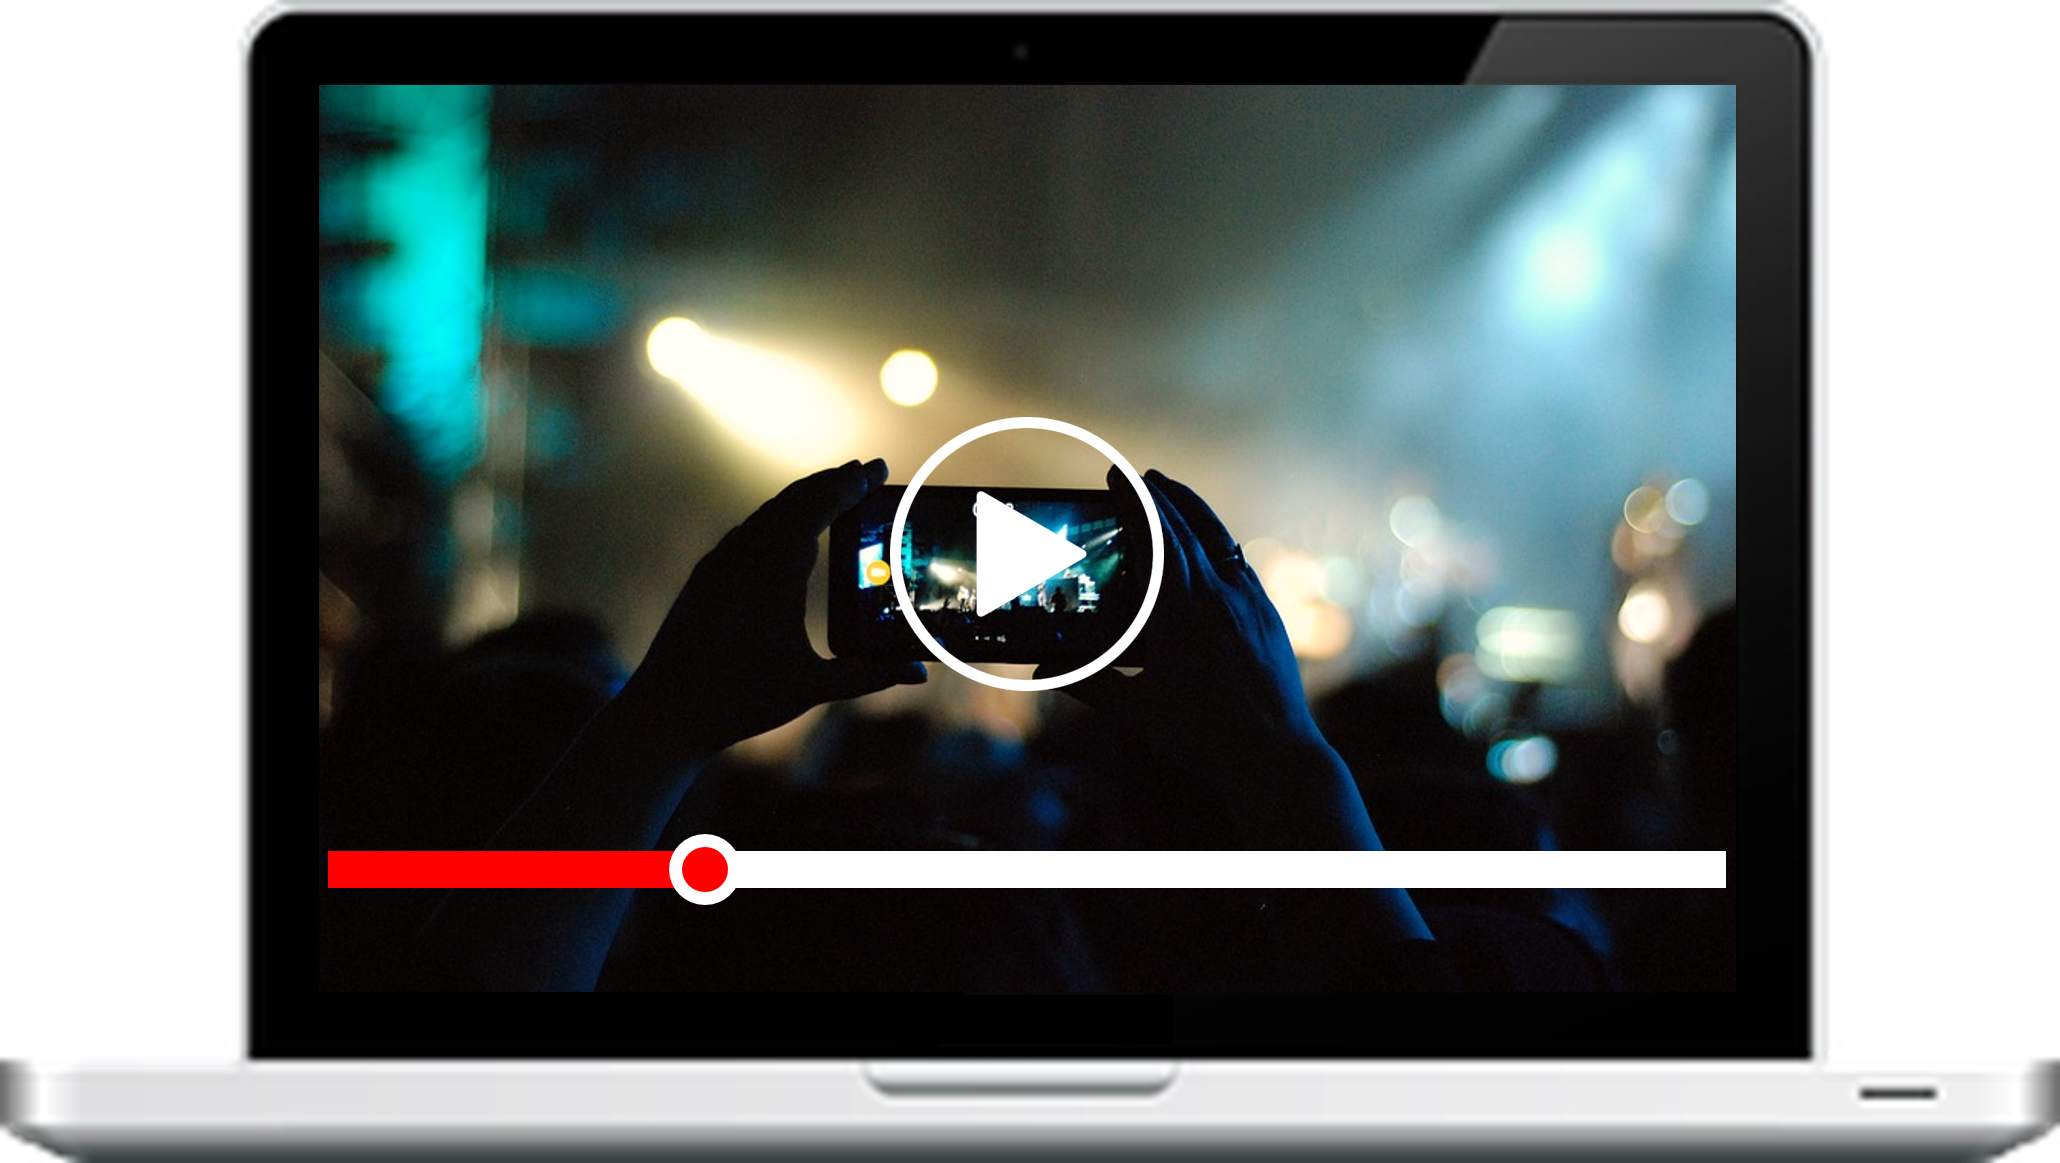 [Guide]: How to Get the Most Out of Your Digital Video Advertising Campaigns